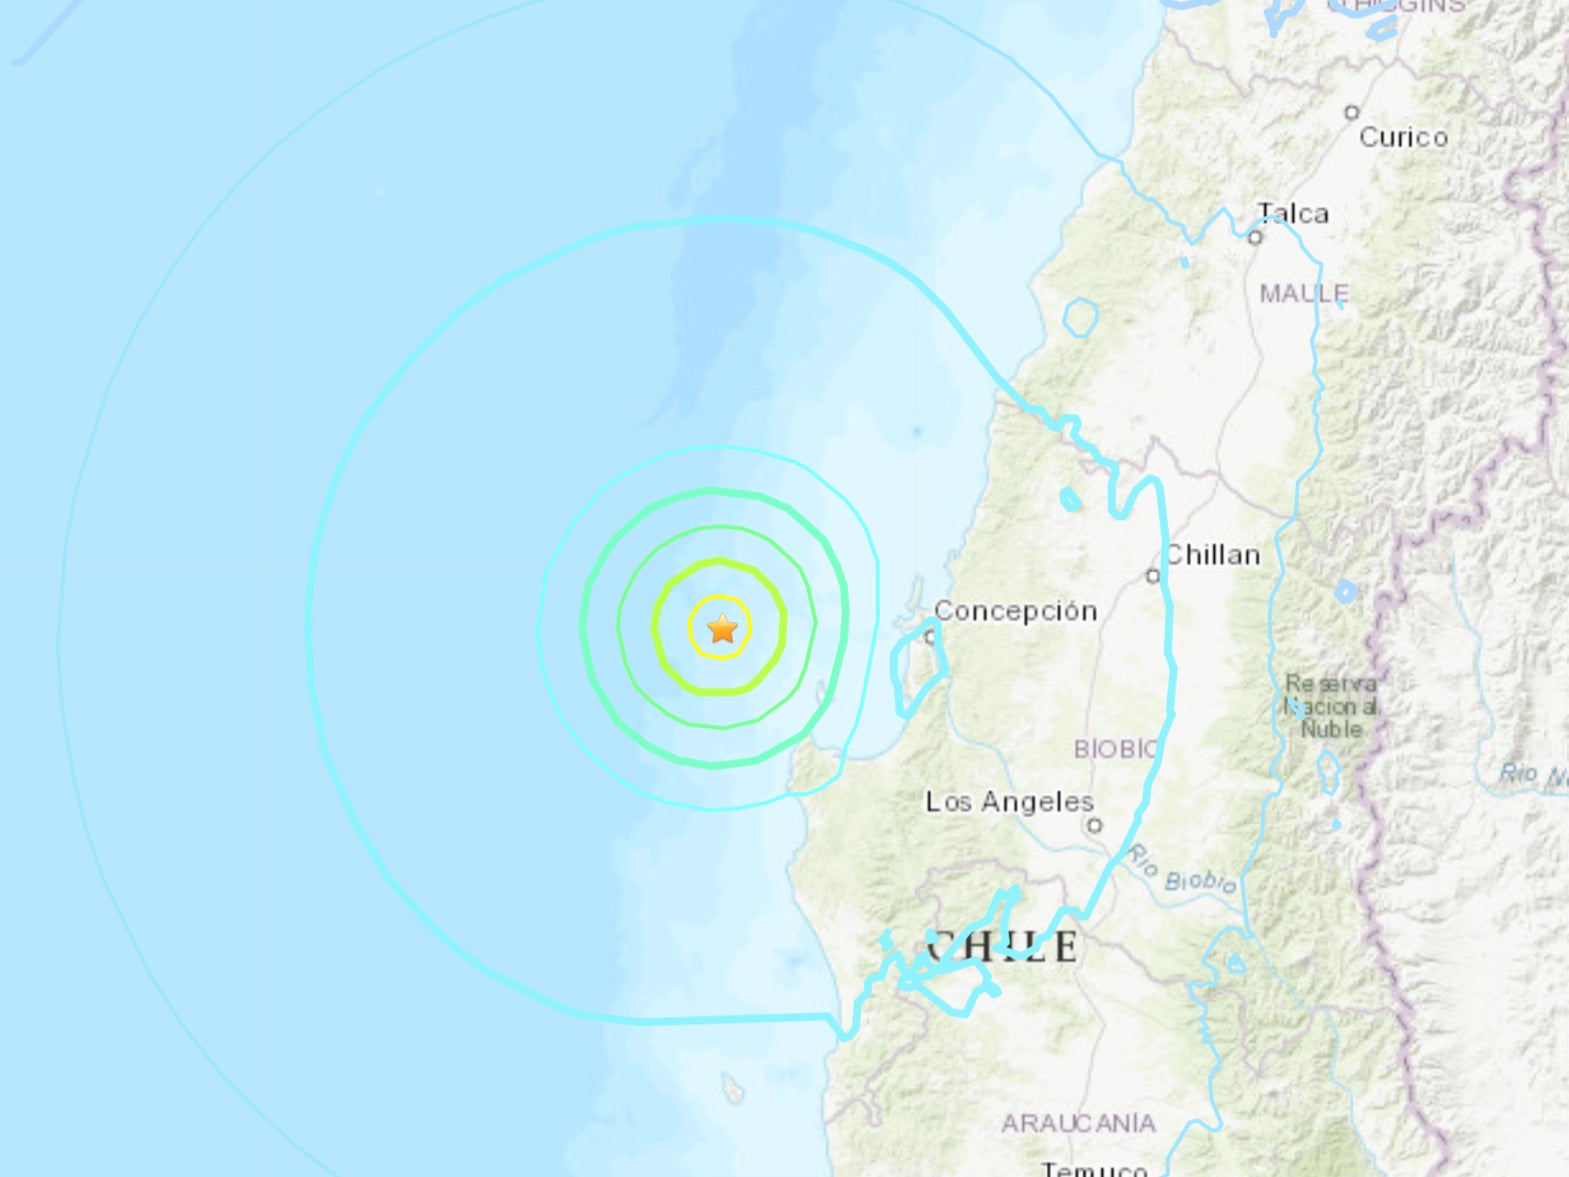 A 6.4 earthquake struck off coast of Chile on Tuesday morning